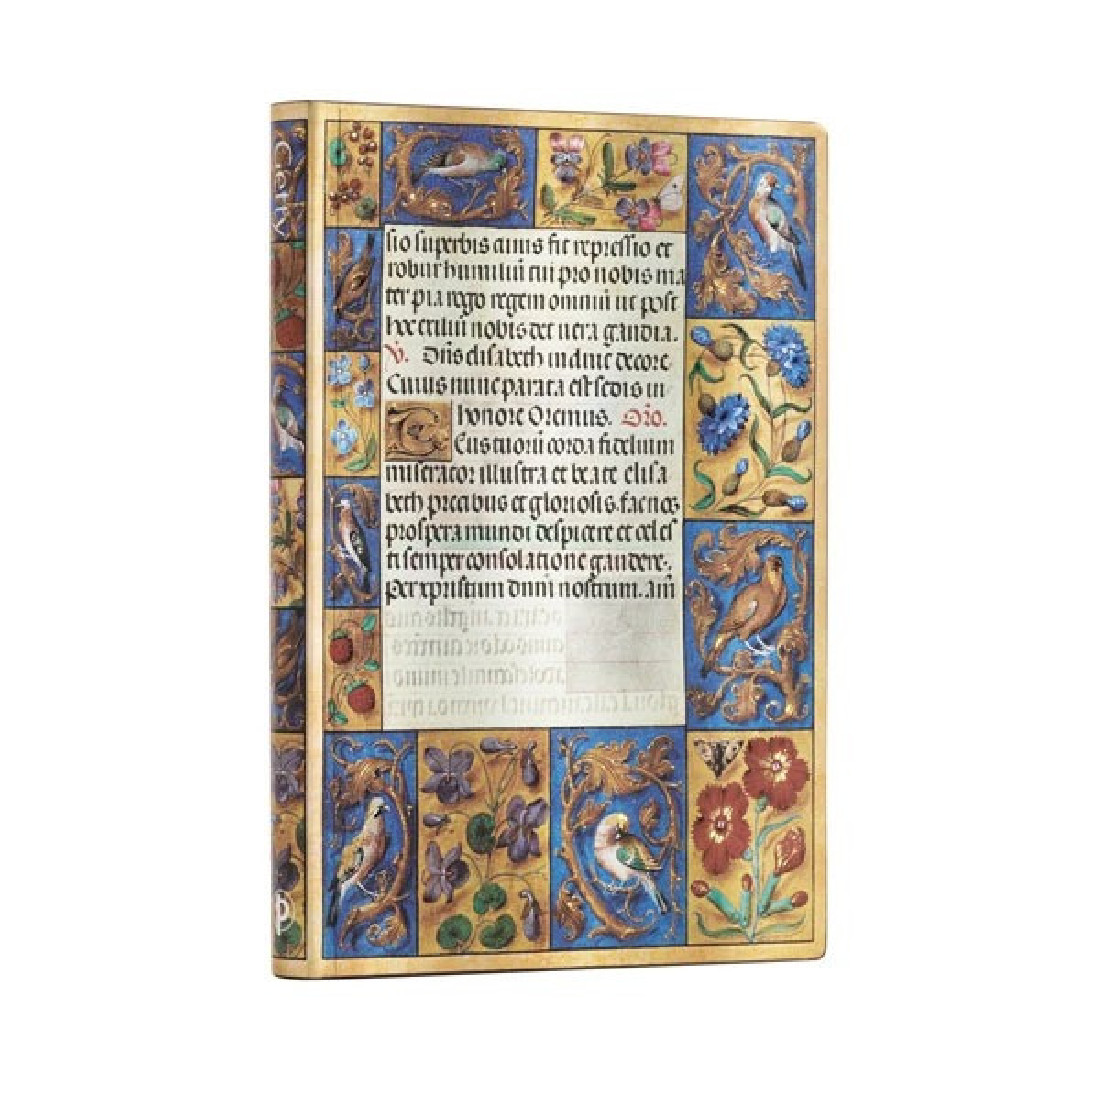 Paperblanks notebook, softcover, flexi, Ancient Illumination, Spinola Hours, midi 13x18cm, lined, 176 pages, 100g